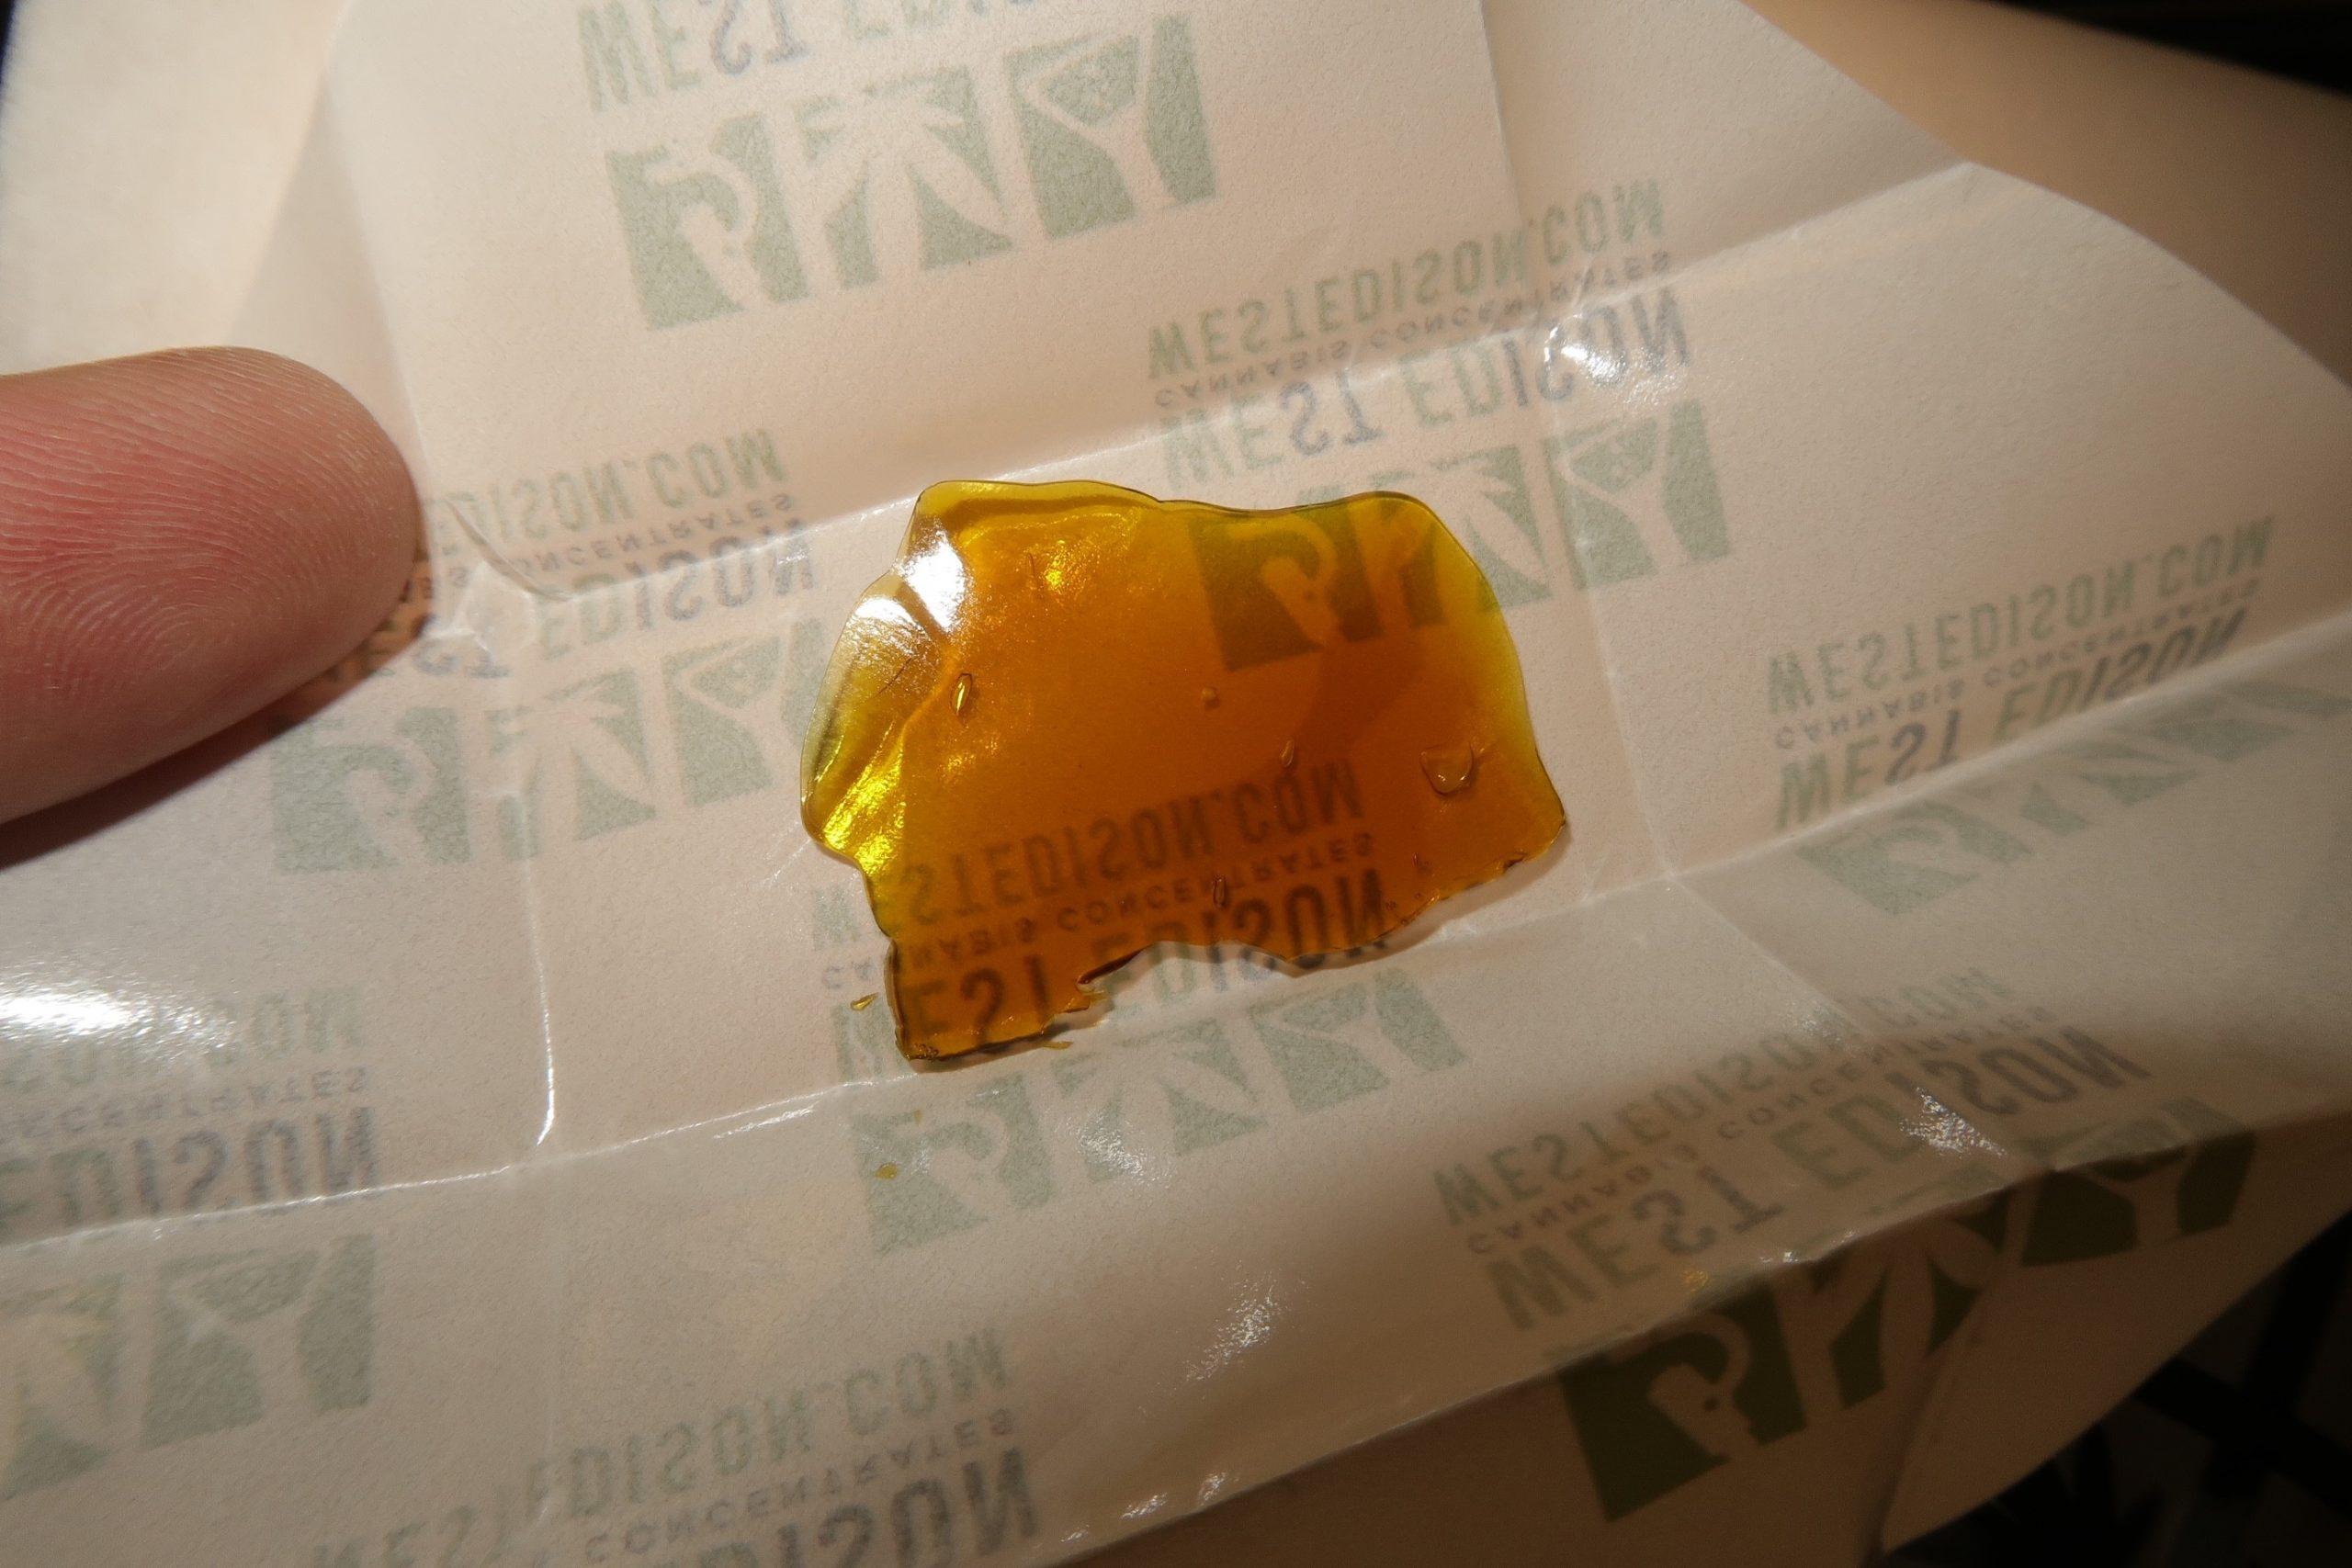 WEST EDISON CANNABIS CONCENTRATES: SHATTER